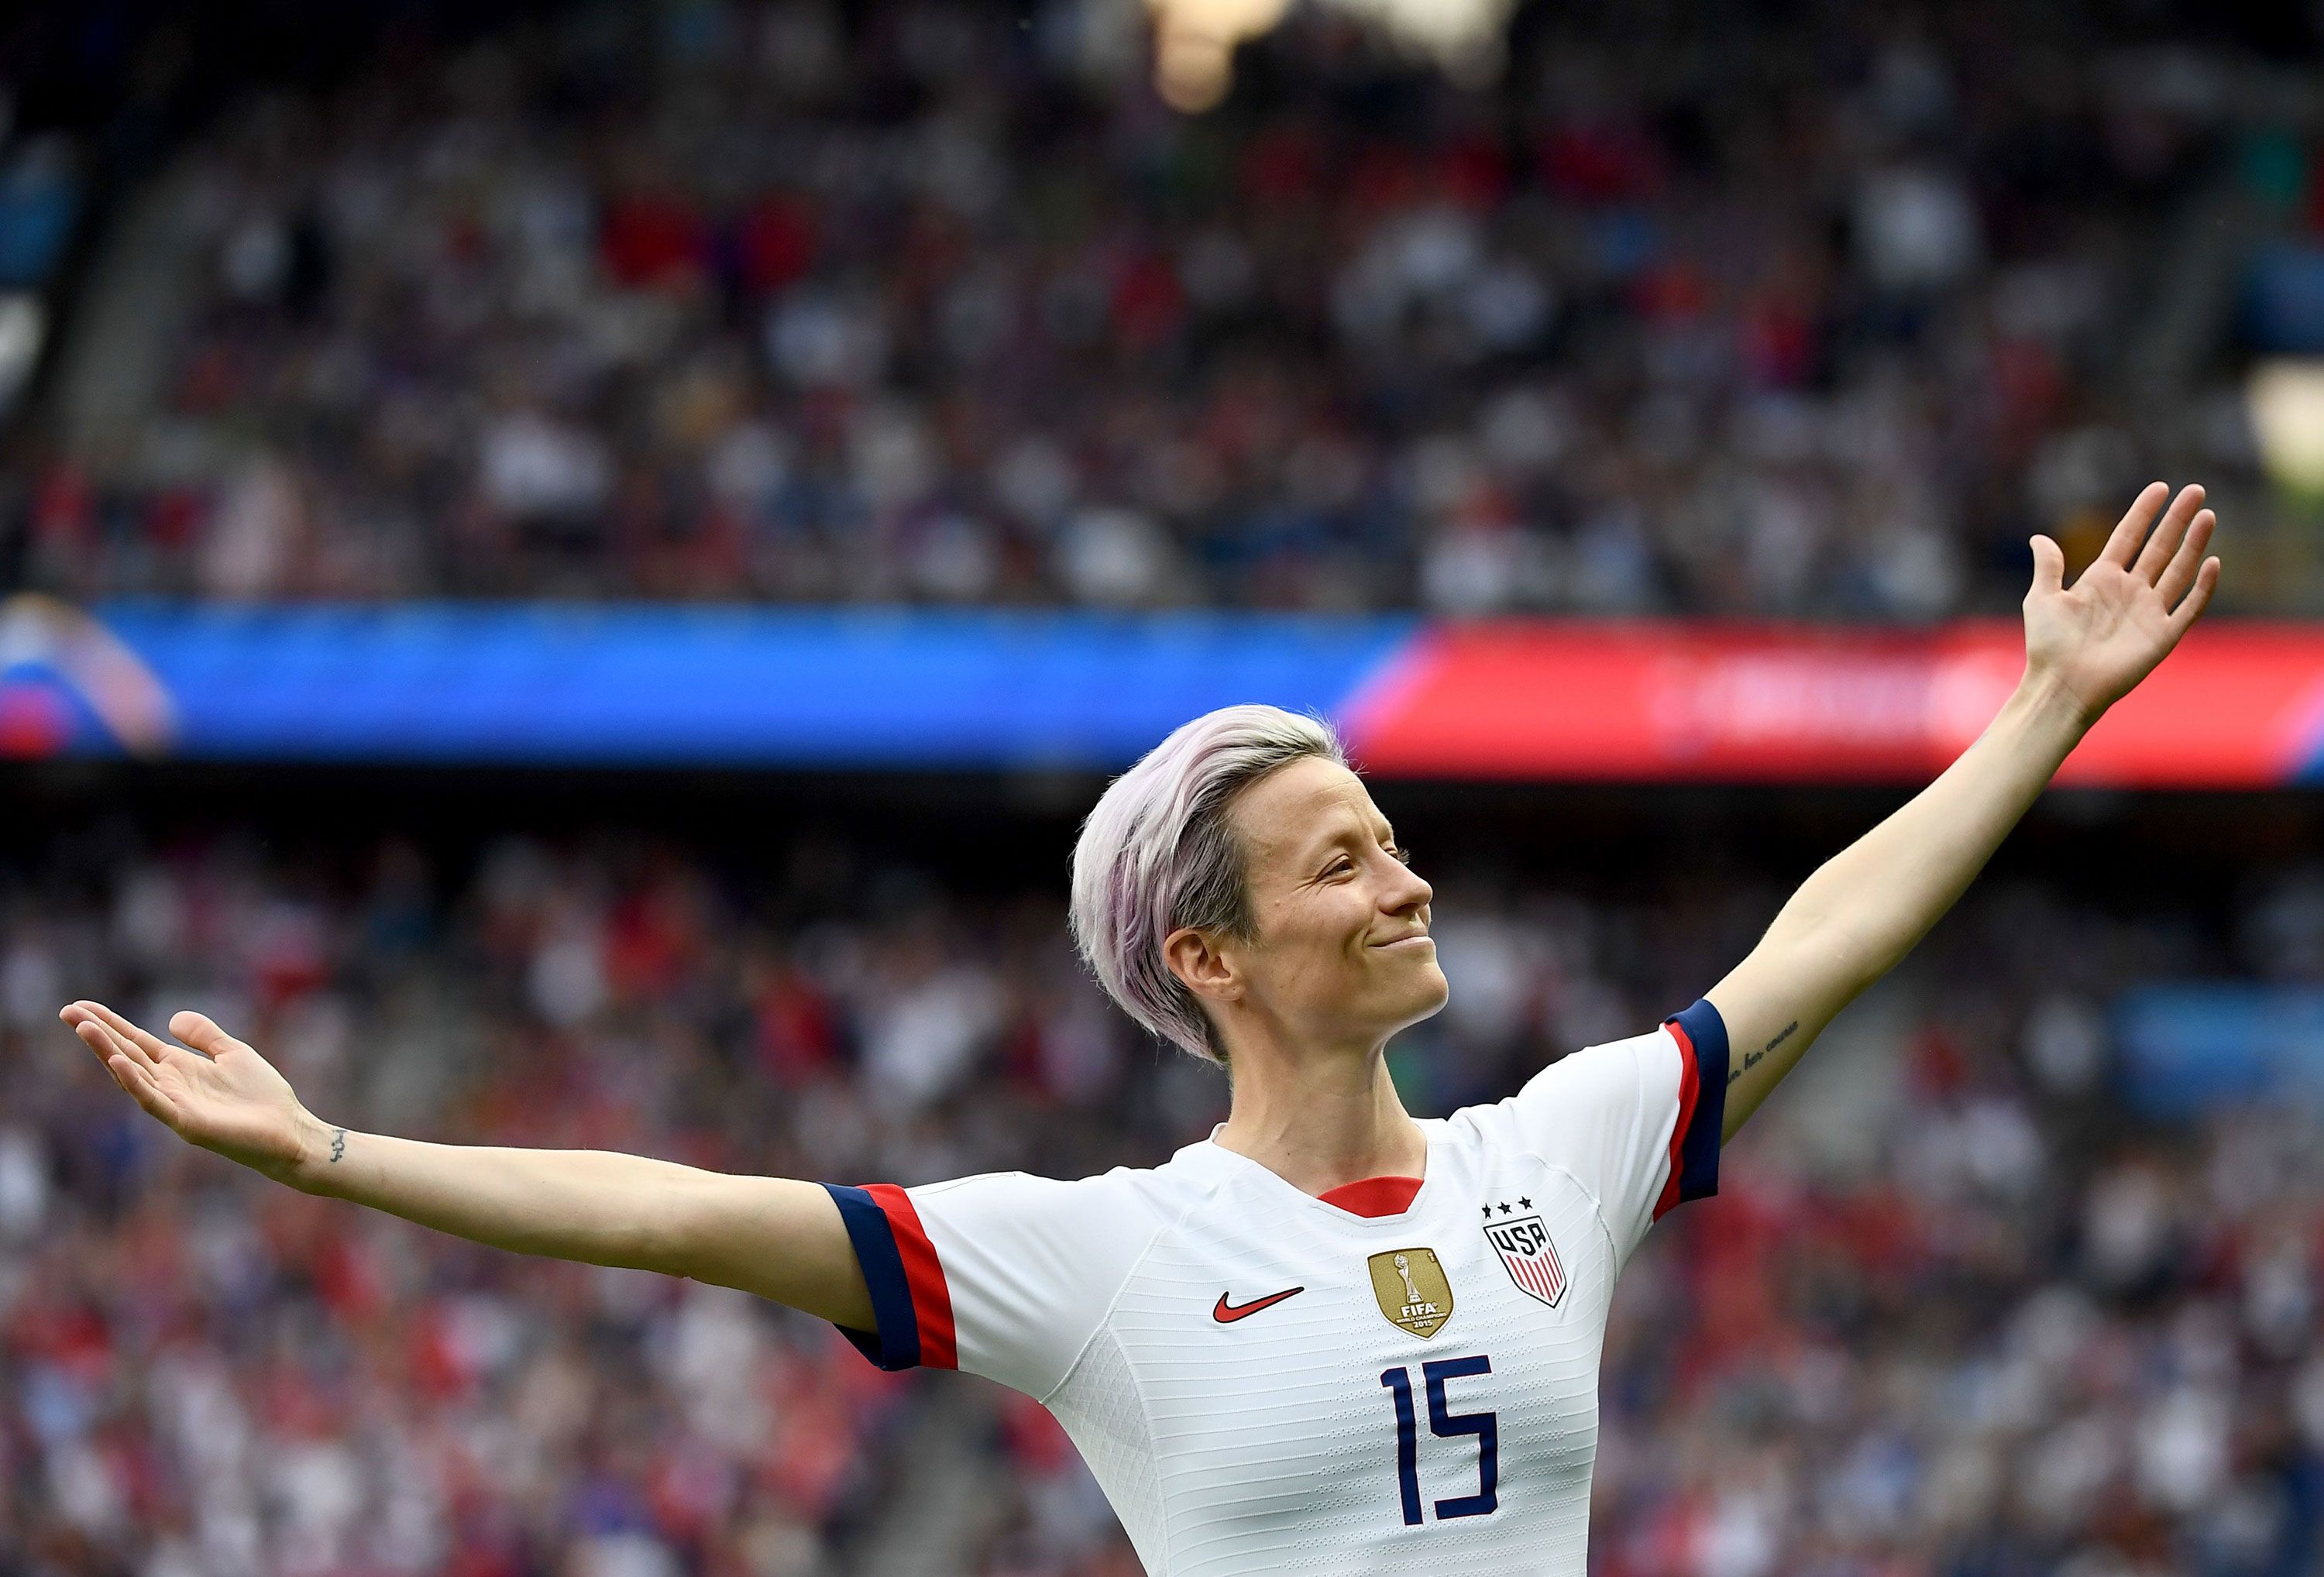 US soccer player Megan Rapinoe celebrates after scoring a goal during the 2019 World Cup quarterfinals against France.